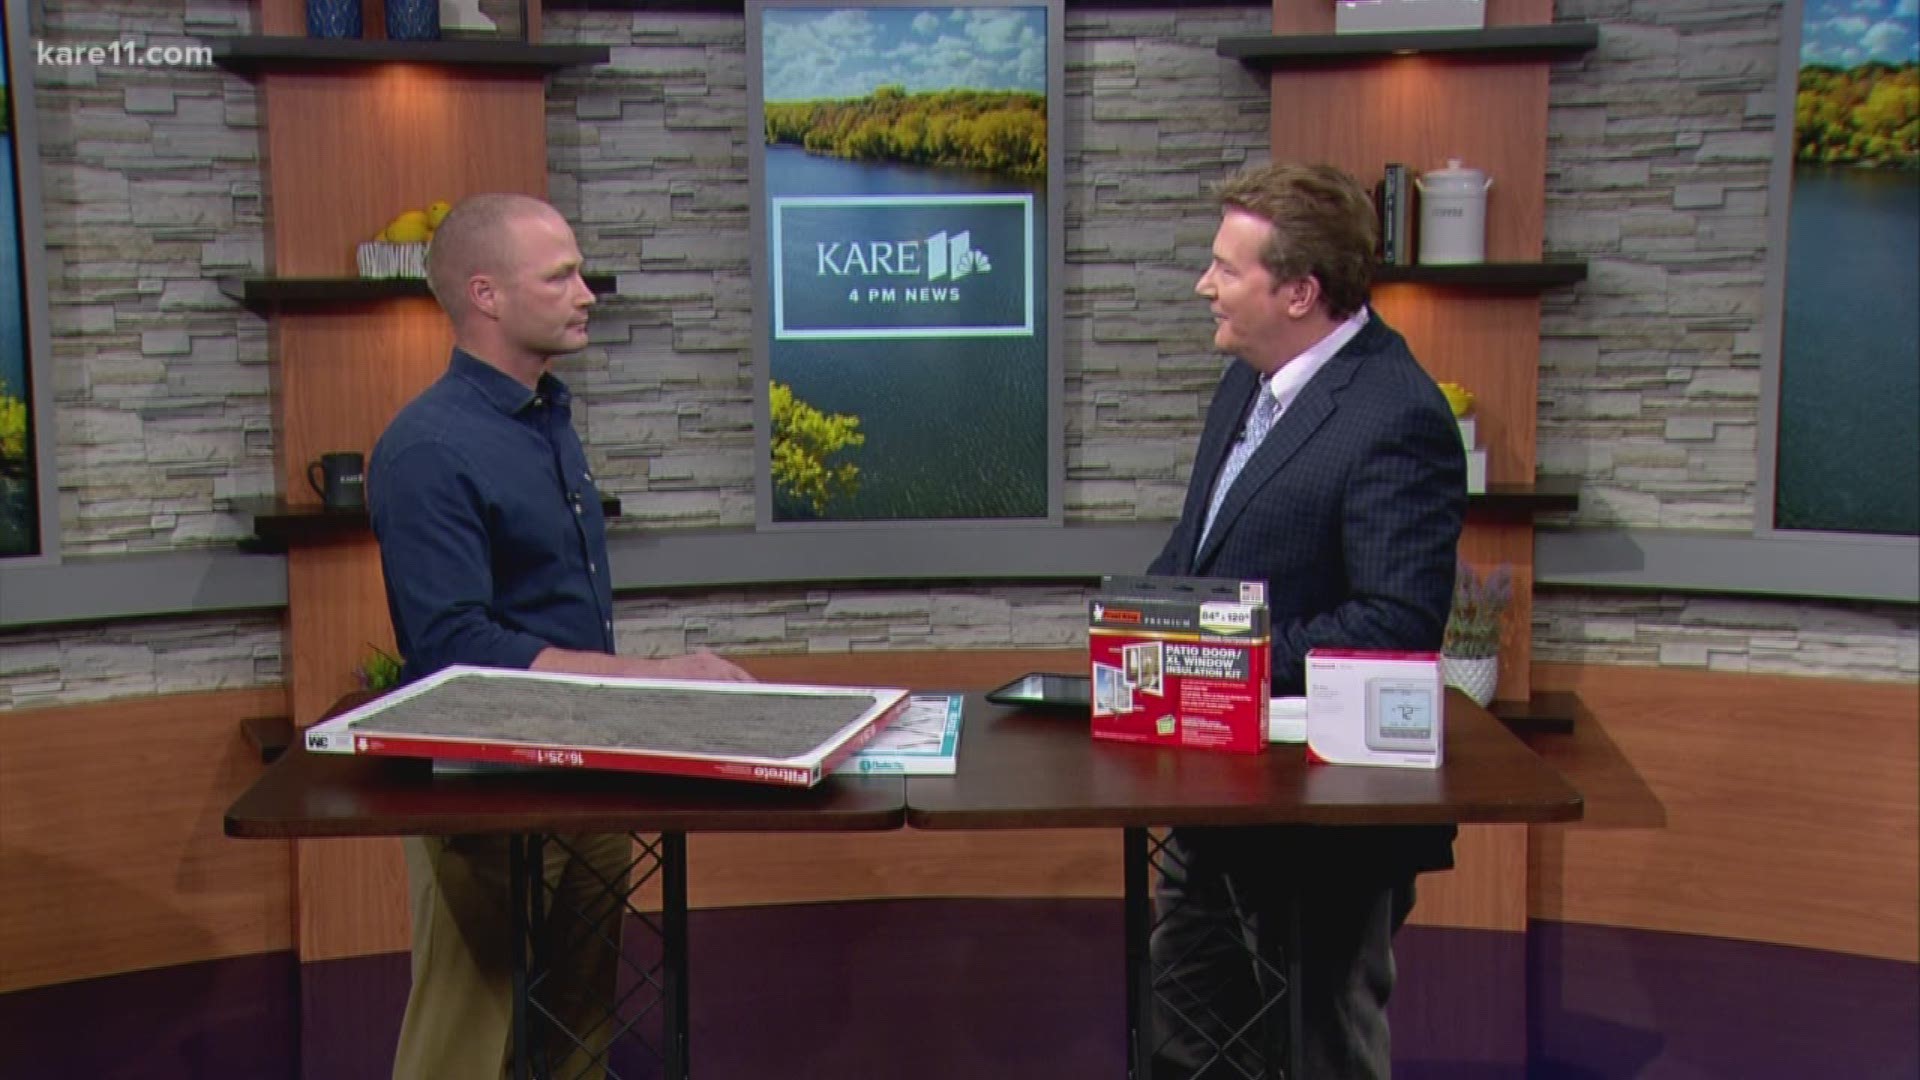 Josh Savage with Hero Plumbing, Heating & Cooling joined KARE 11 to share some tips to help homeowners and renters heat their homes as safely and efficiently as possible.